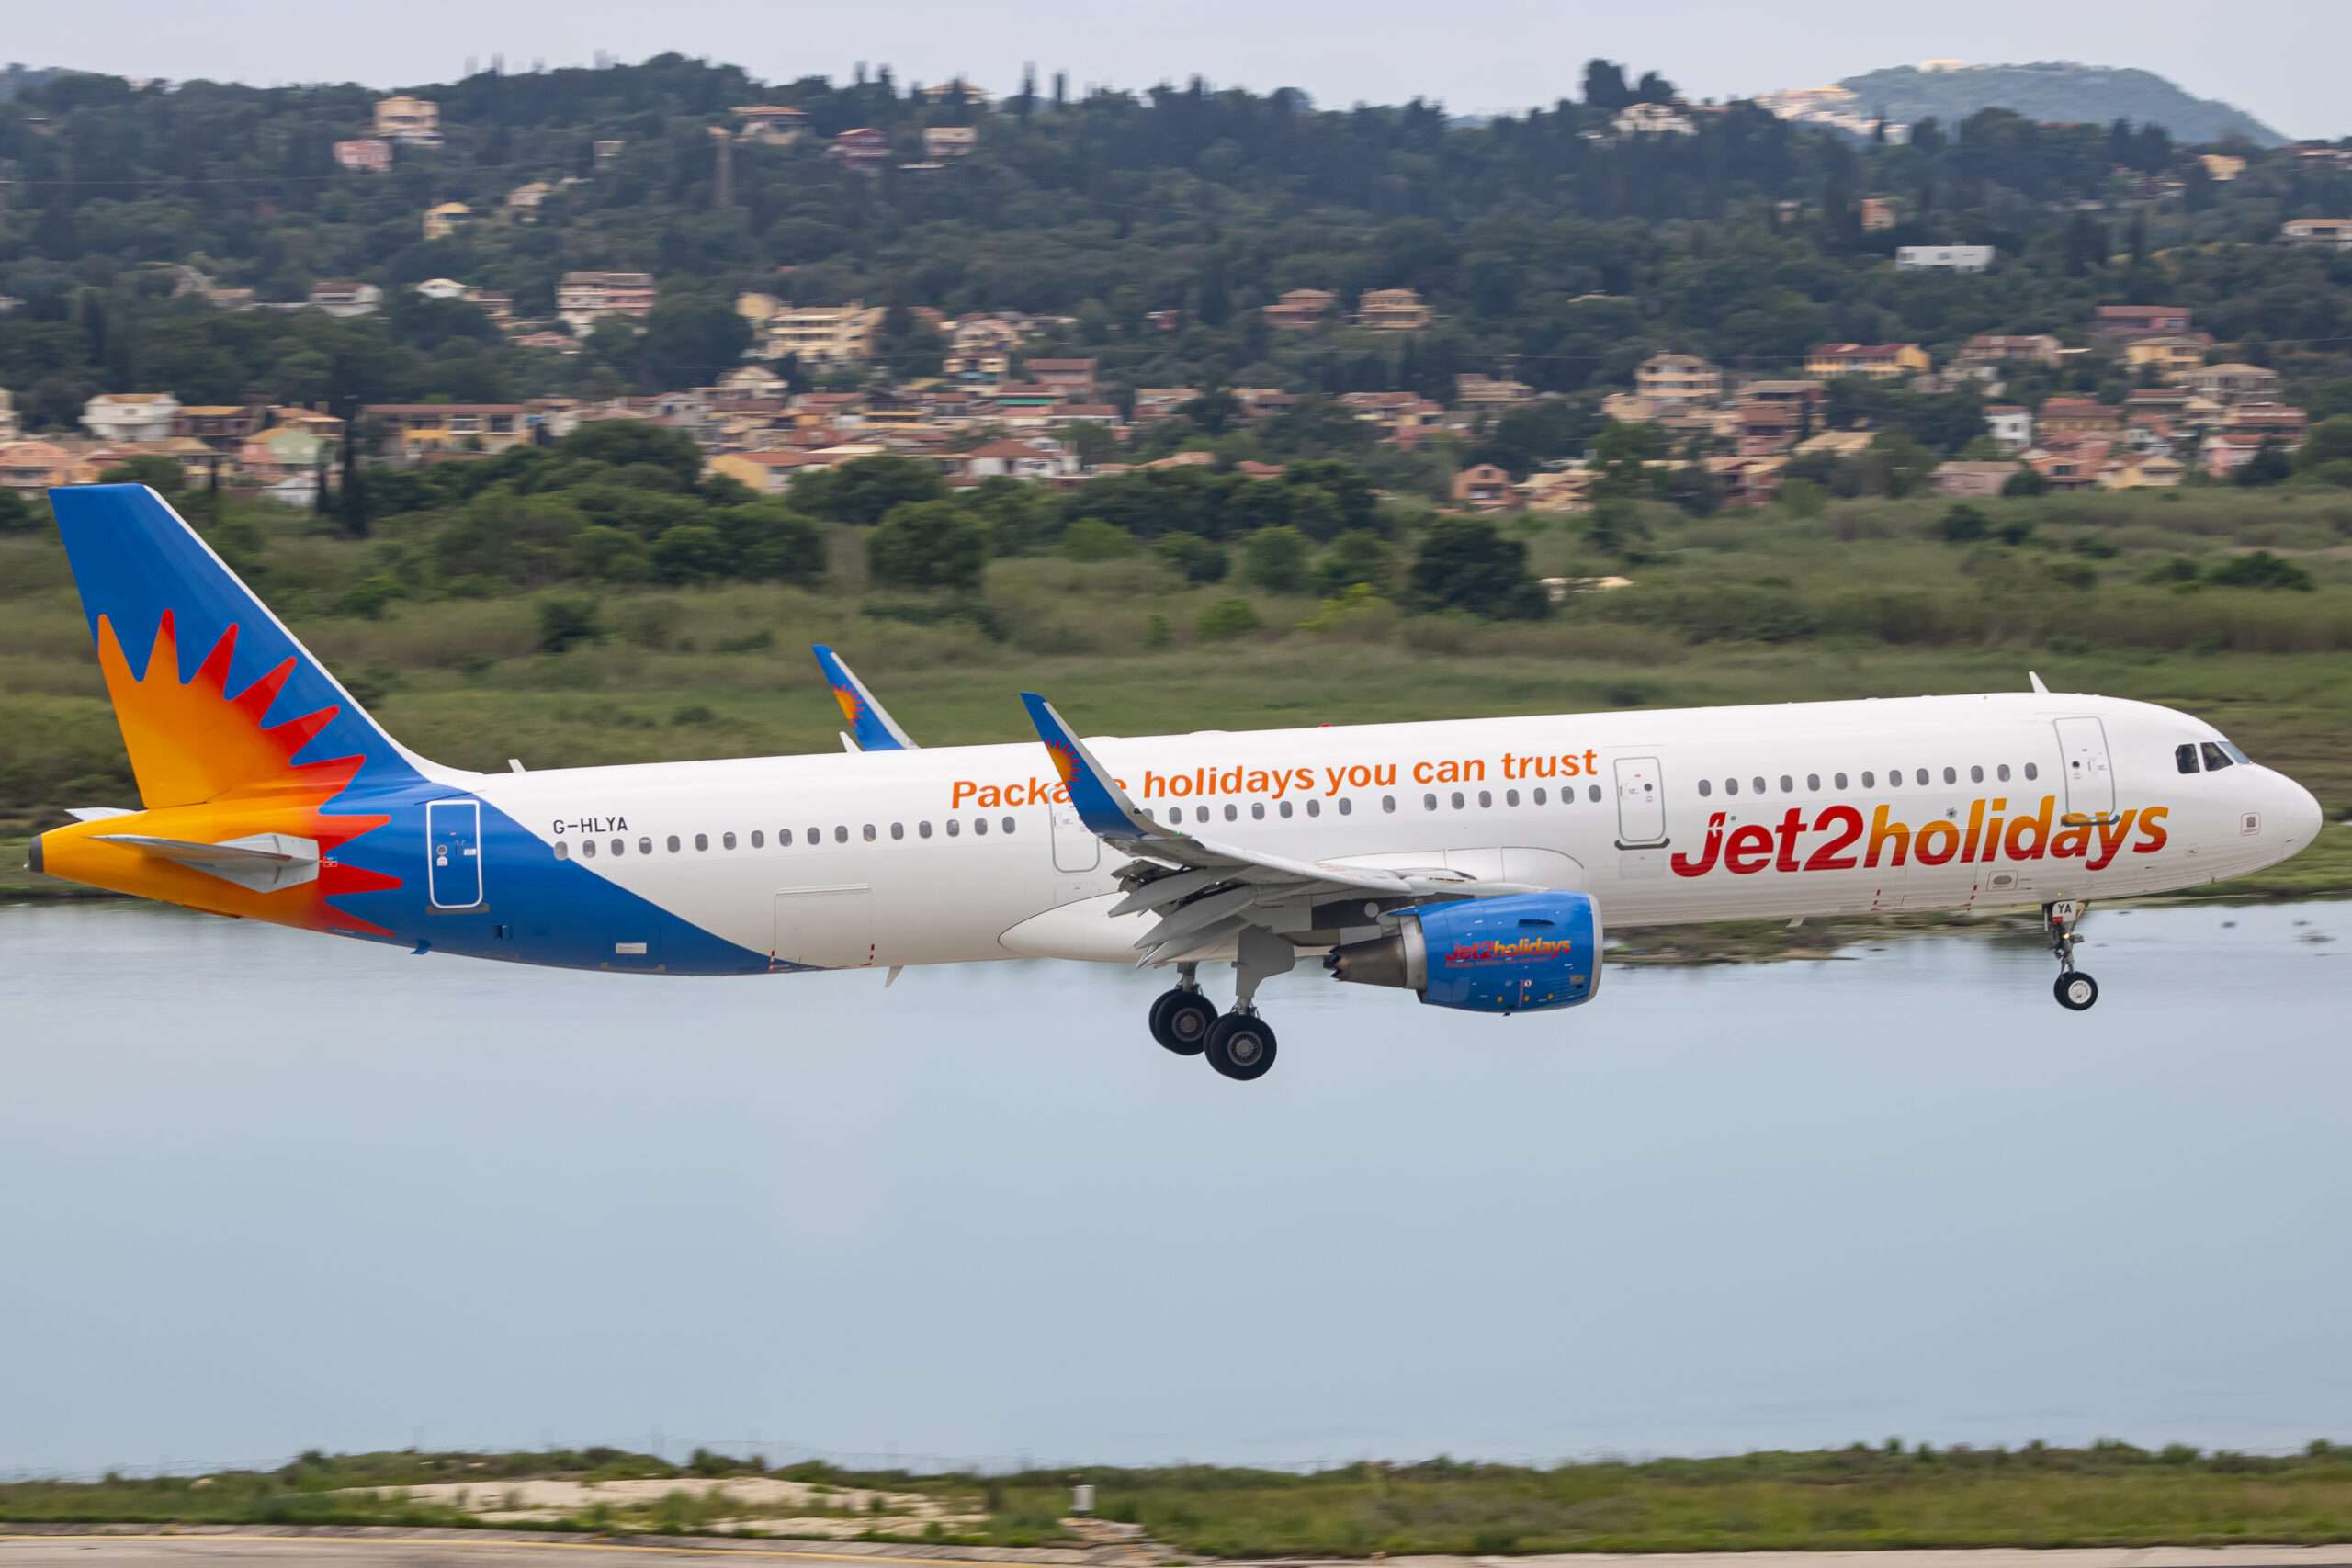 Today, Jet2 has stormed the airline industry by announcing an extensive Summer 2025 program. Let's take a deeper look into this.